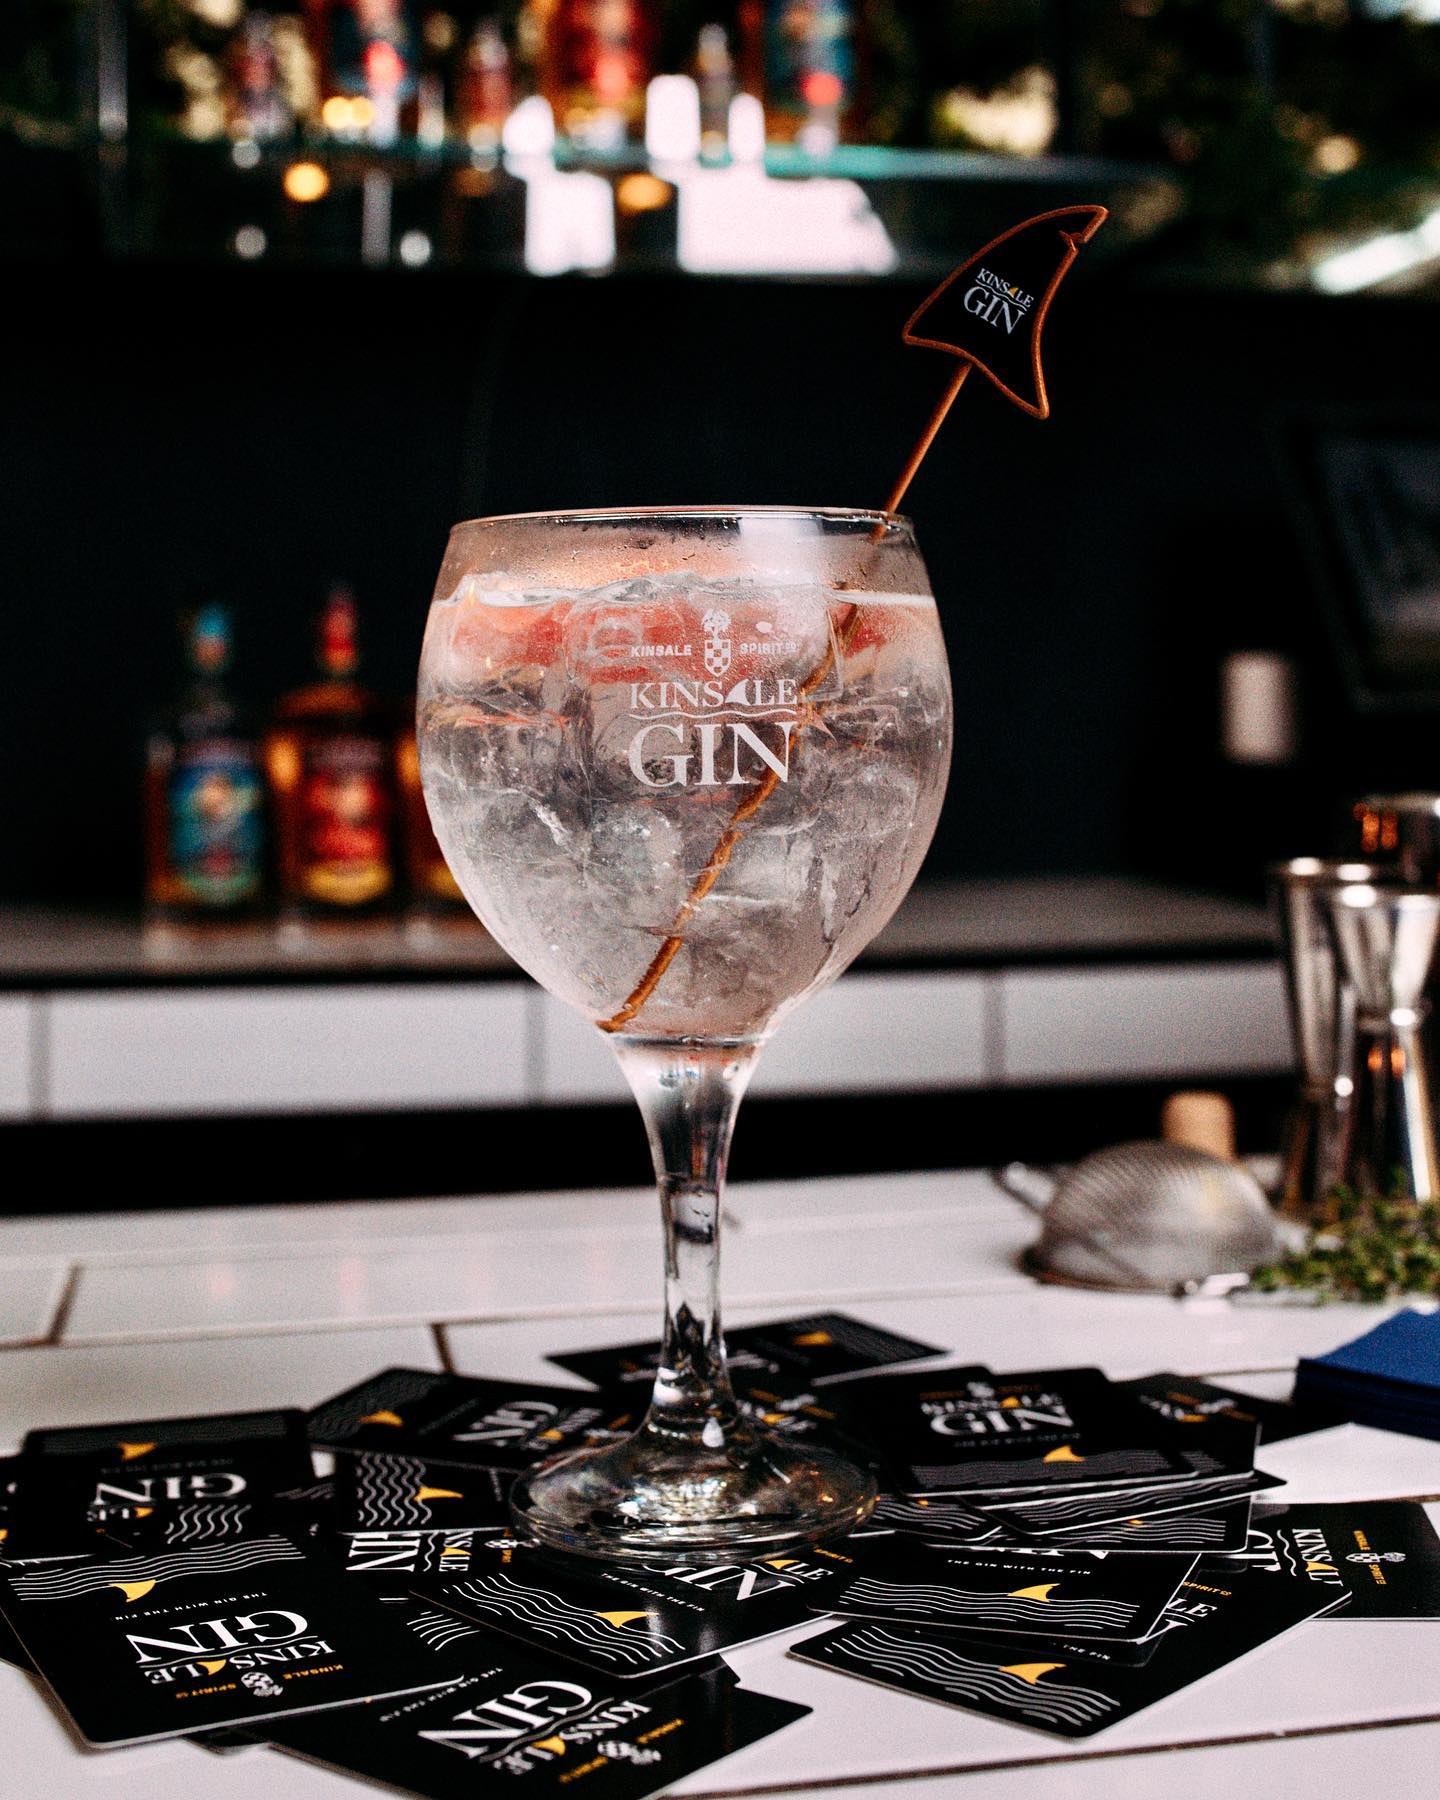 💛 Kinsale Gin has elegant amounts of juniper with notes of meadowsweet, elderﬂower and elderberry combining with aromas of lemon verbena and lemon geraniums.

🍸 Simply look or ask for the “GIN with the FIN” 

#drinkresponsibly #supervalu #centra #gin #kinsalegin #irishgin #gnt #irish #ireland #drinks #local #shoplocal #tasty #pubs #bars #newyear